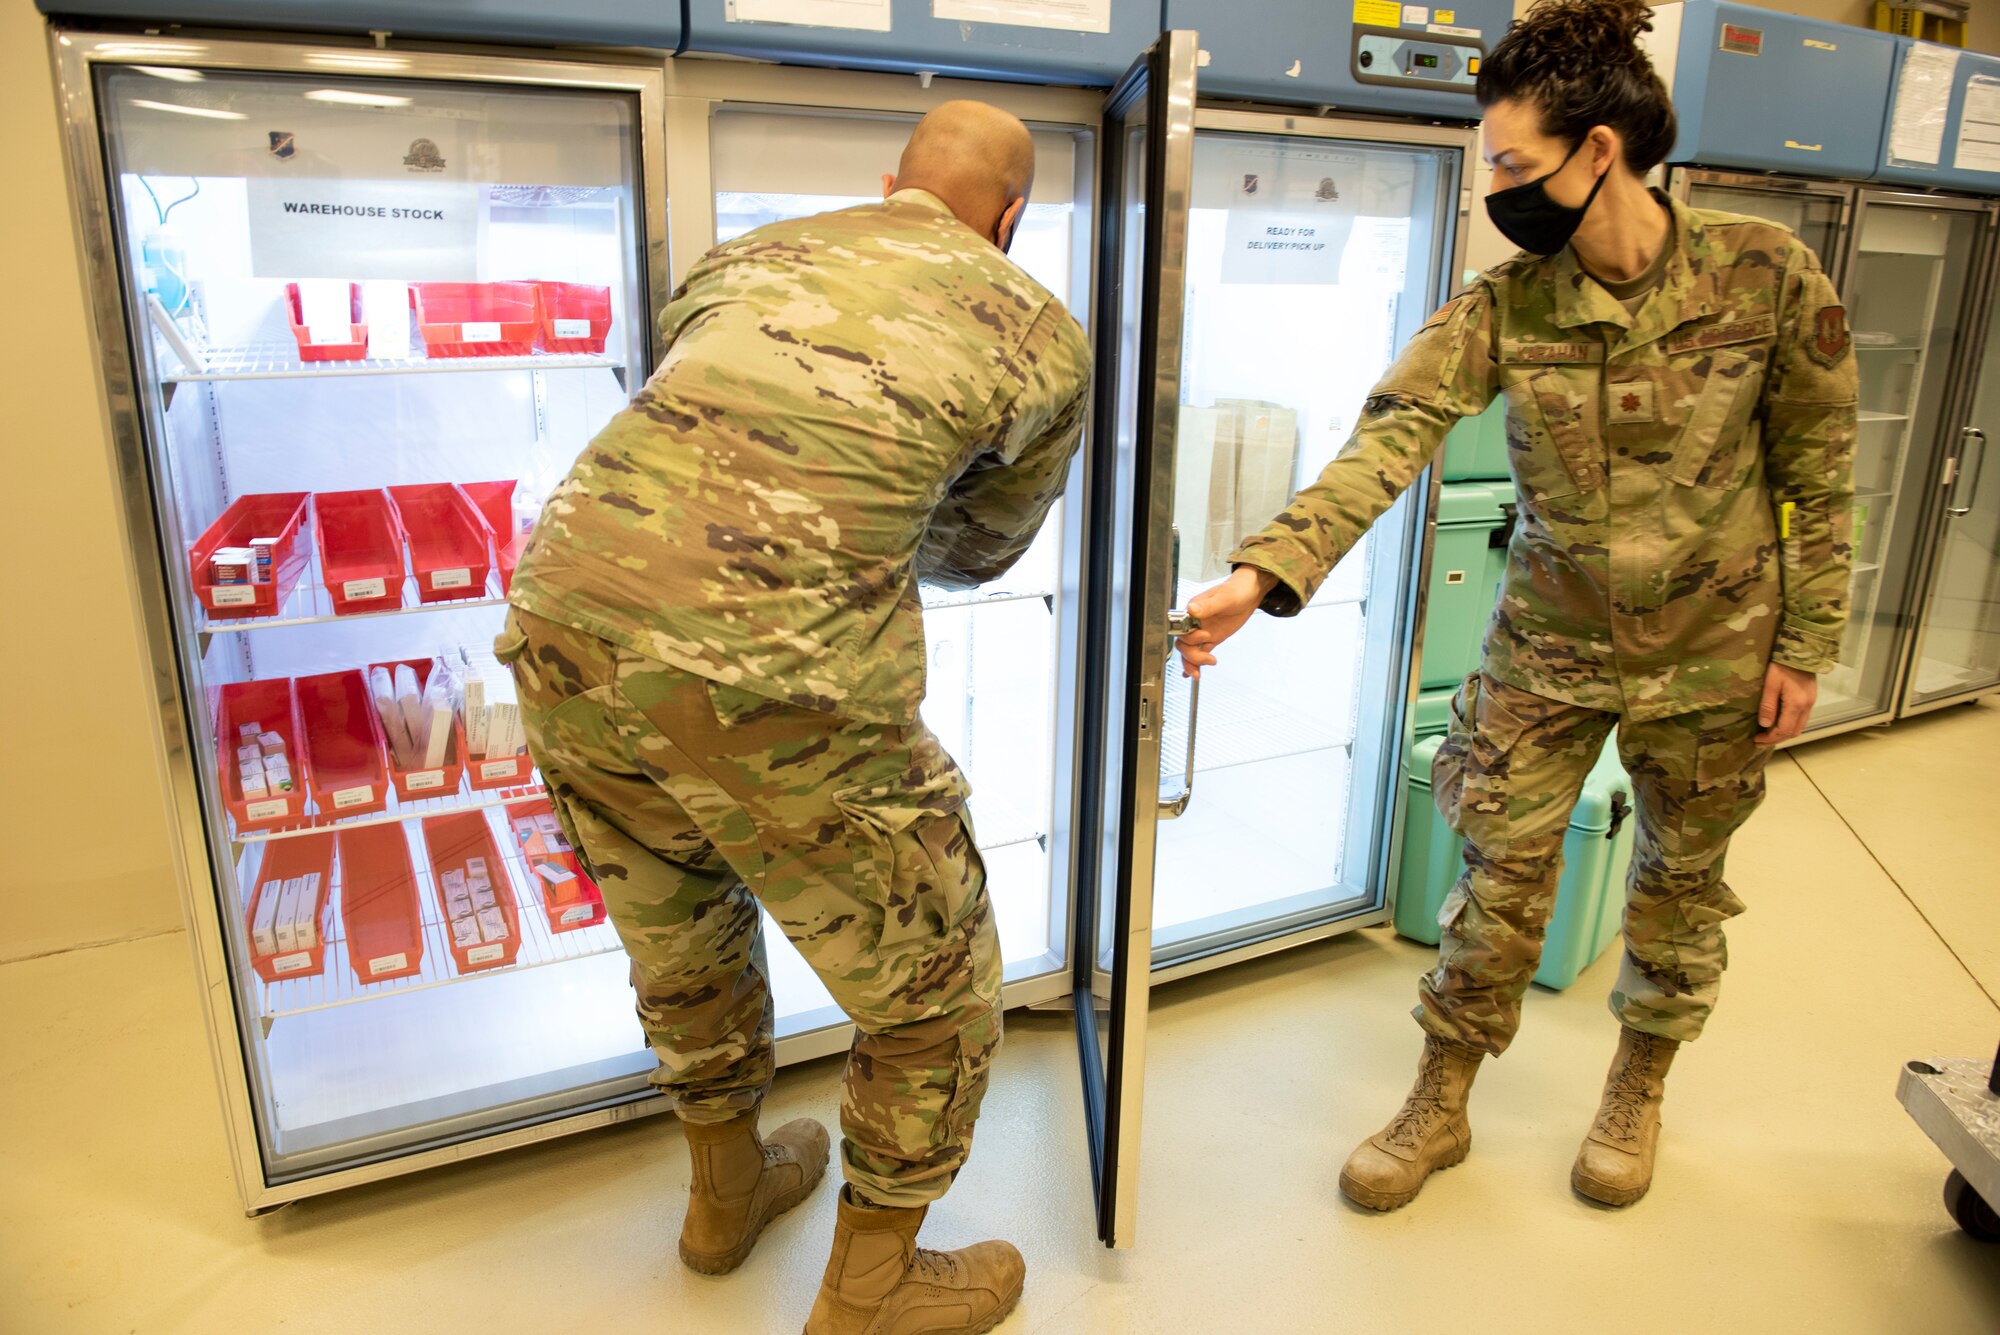 An female Major holds open a refrigerator door for a male Airman to put vials of medicine inside.